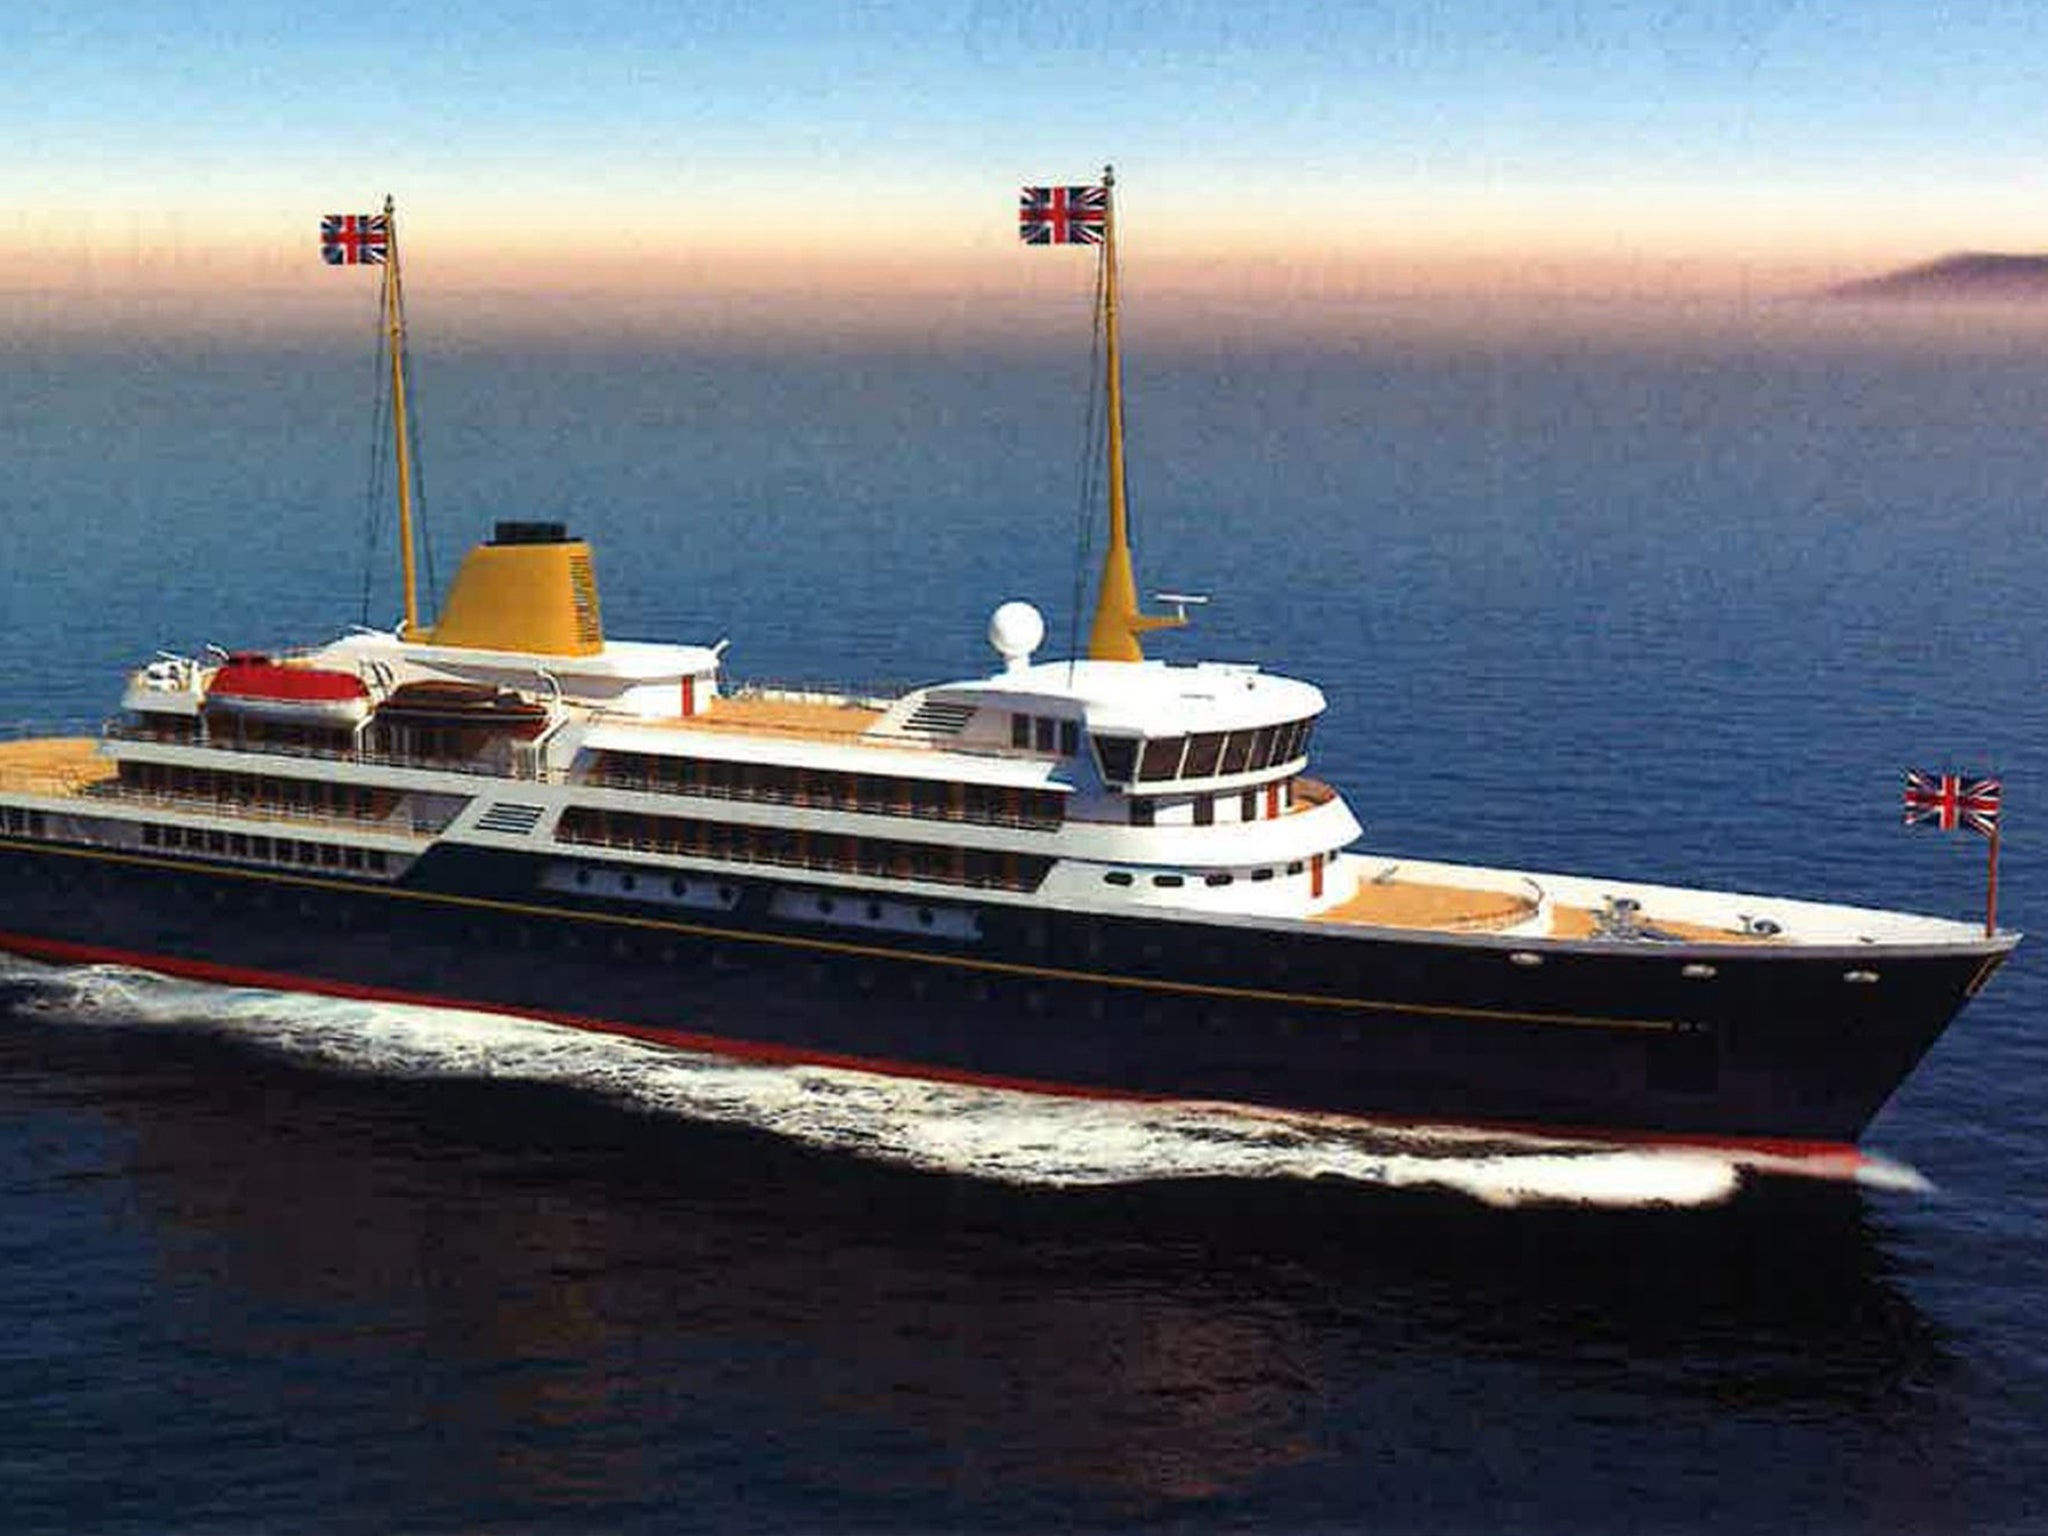 An image issued by 10 Downing Street showing an artist's impression of a new national flagship, the successor to the Royal Yacht Britannia